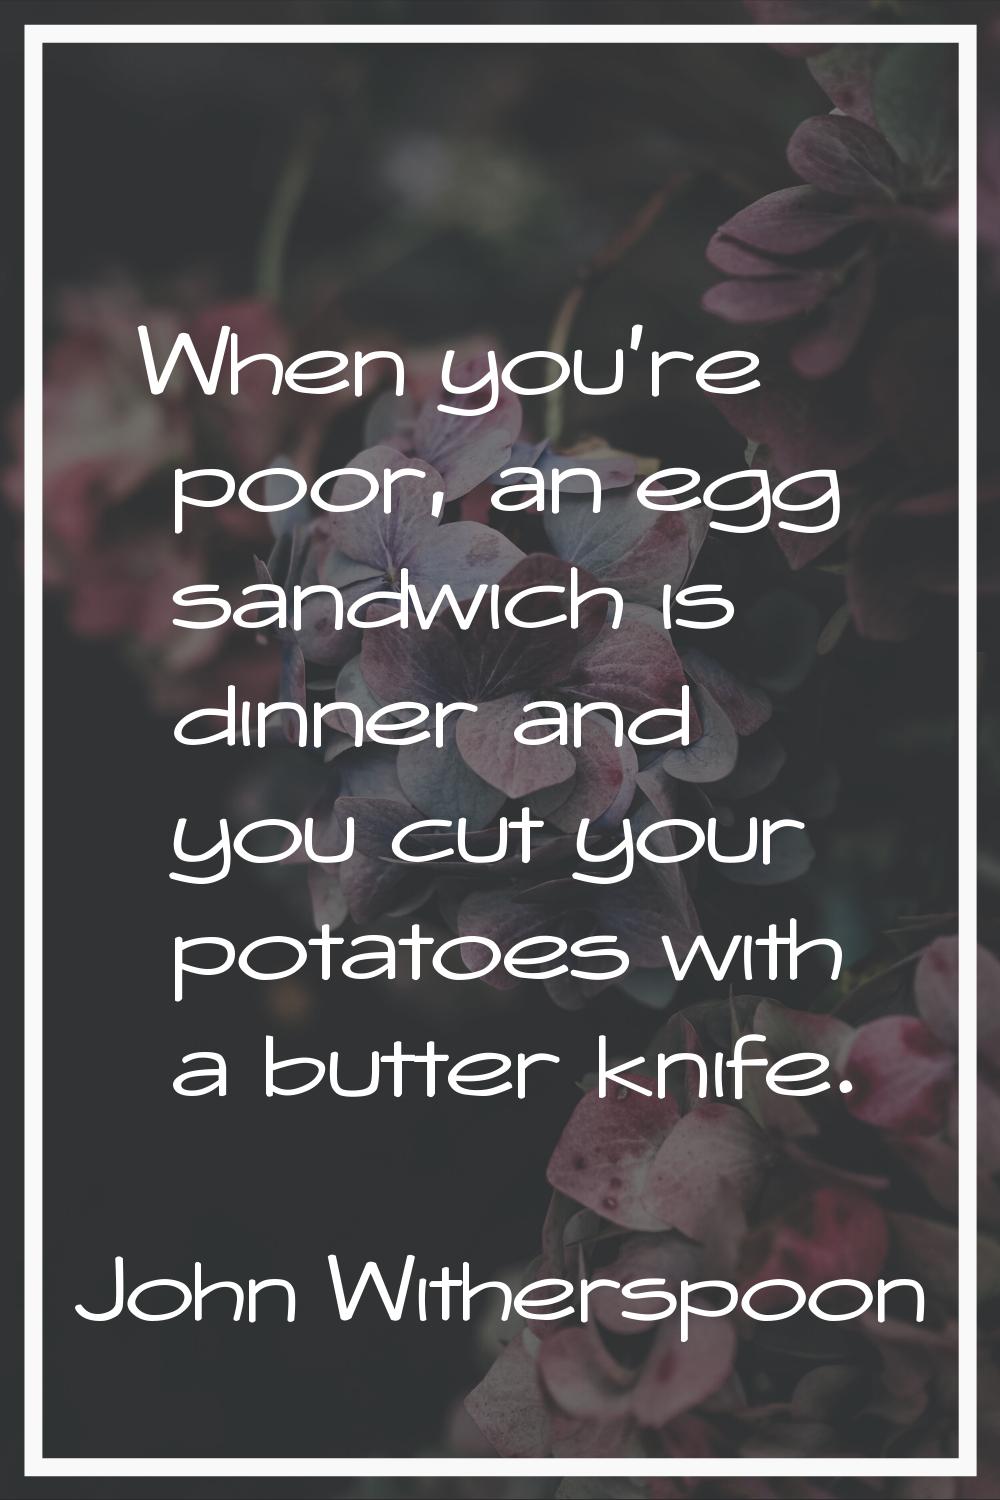 When you're poor, an egg sandwich is dinner and you cut your potatoes with a butter knife.